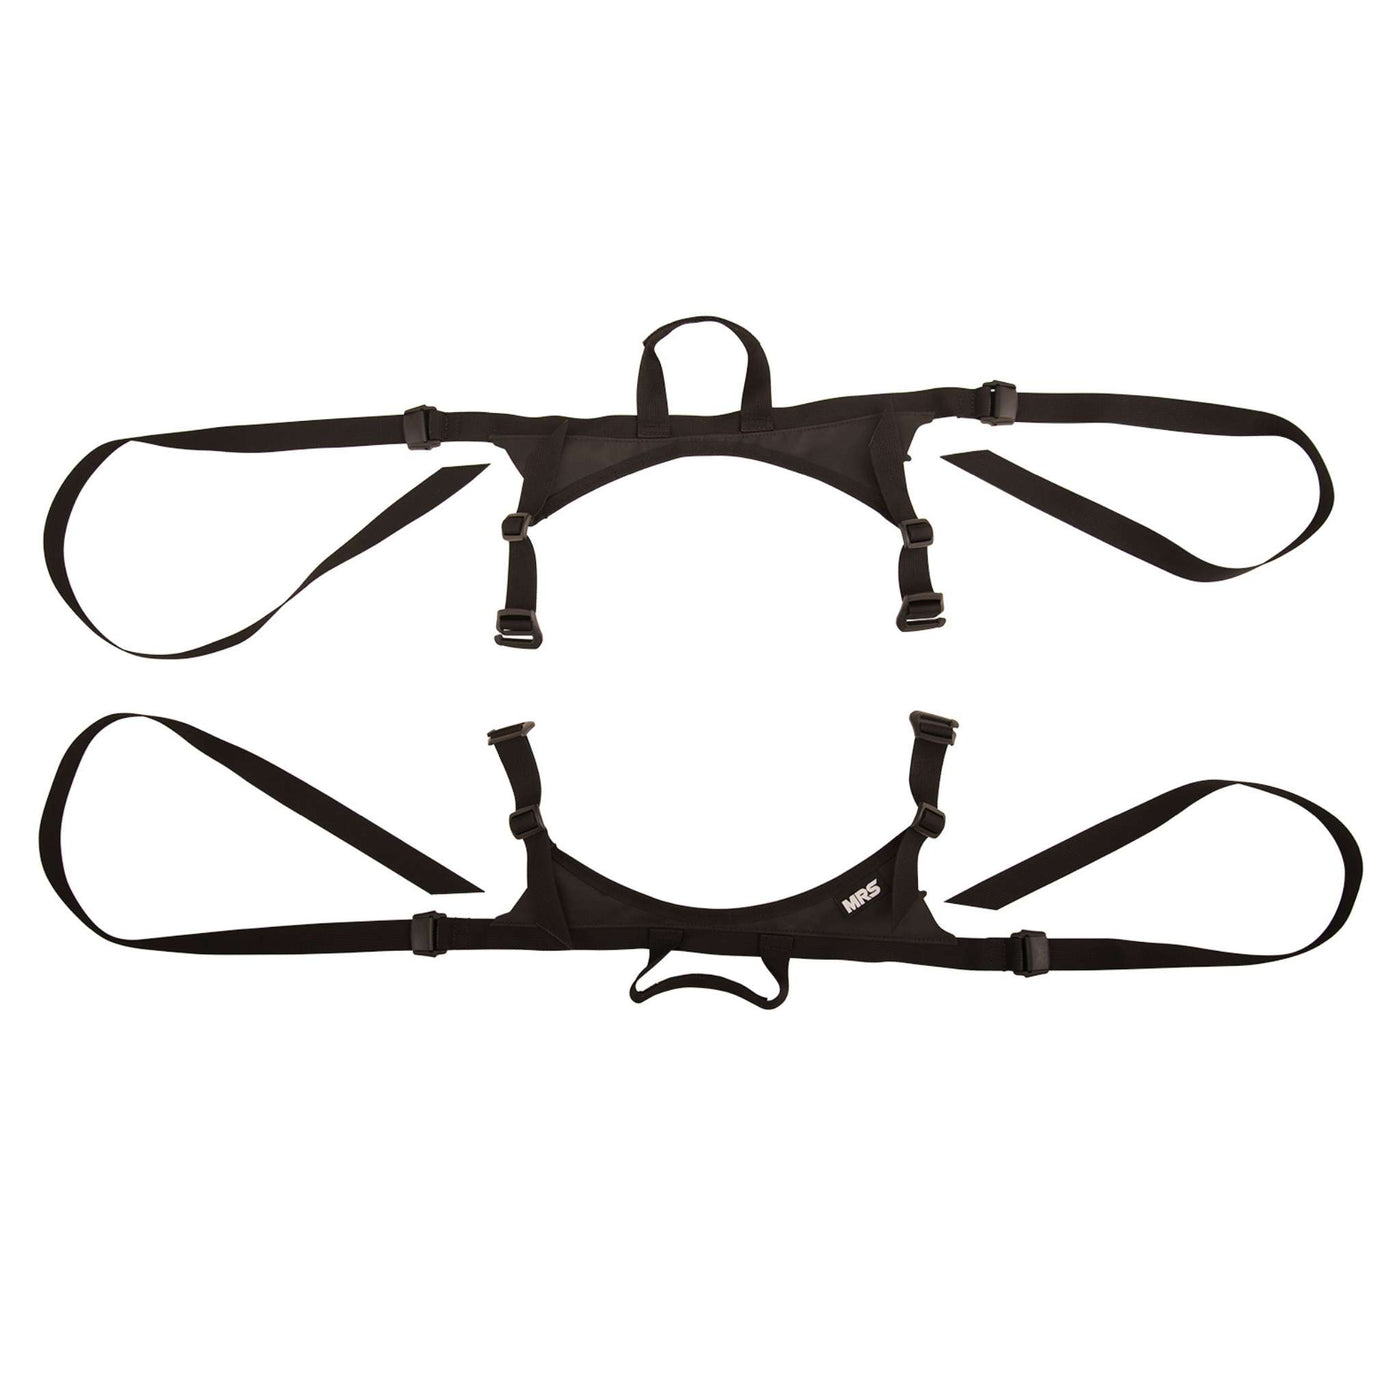 Micro Rafting Systems Thigh Straps Pro - 5 Point | White Water Accessories NZ | Further Faster Christchurch NZ